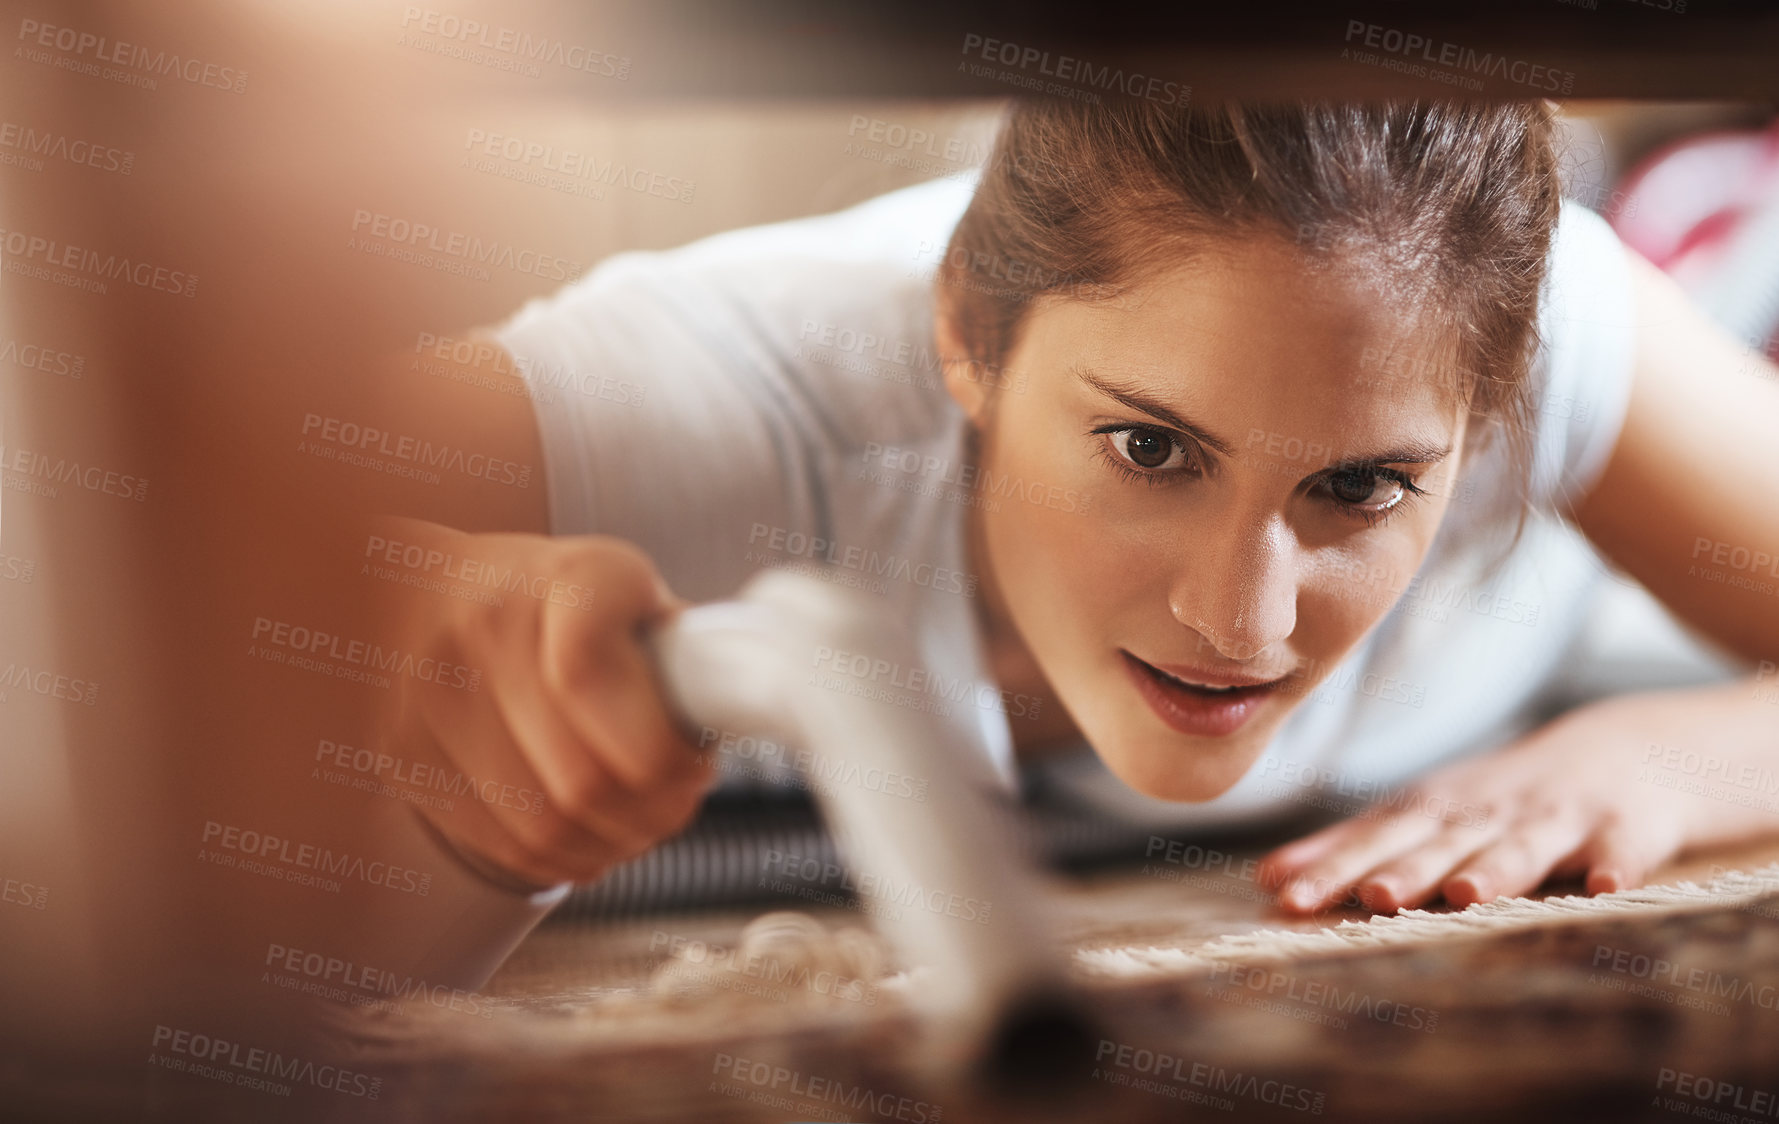 Buy stock photo Closeup shot of a young woman vacuuming underneath a piece of furniture